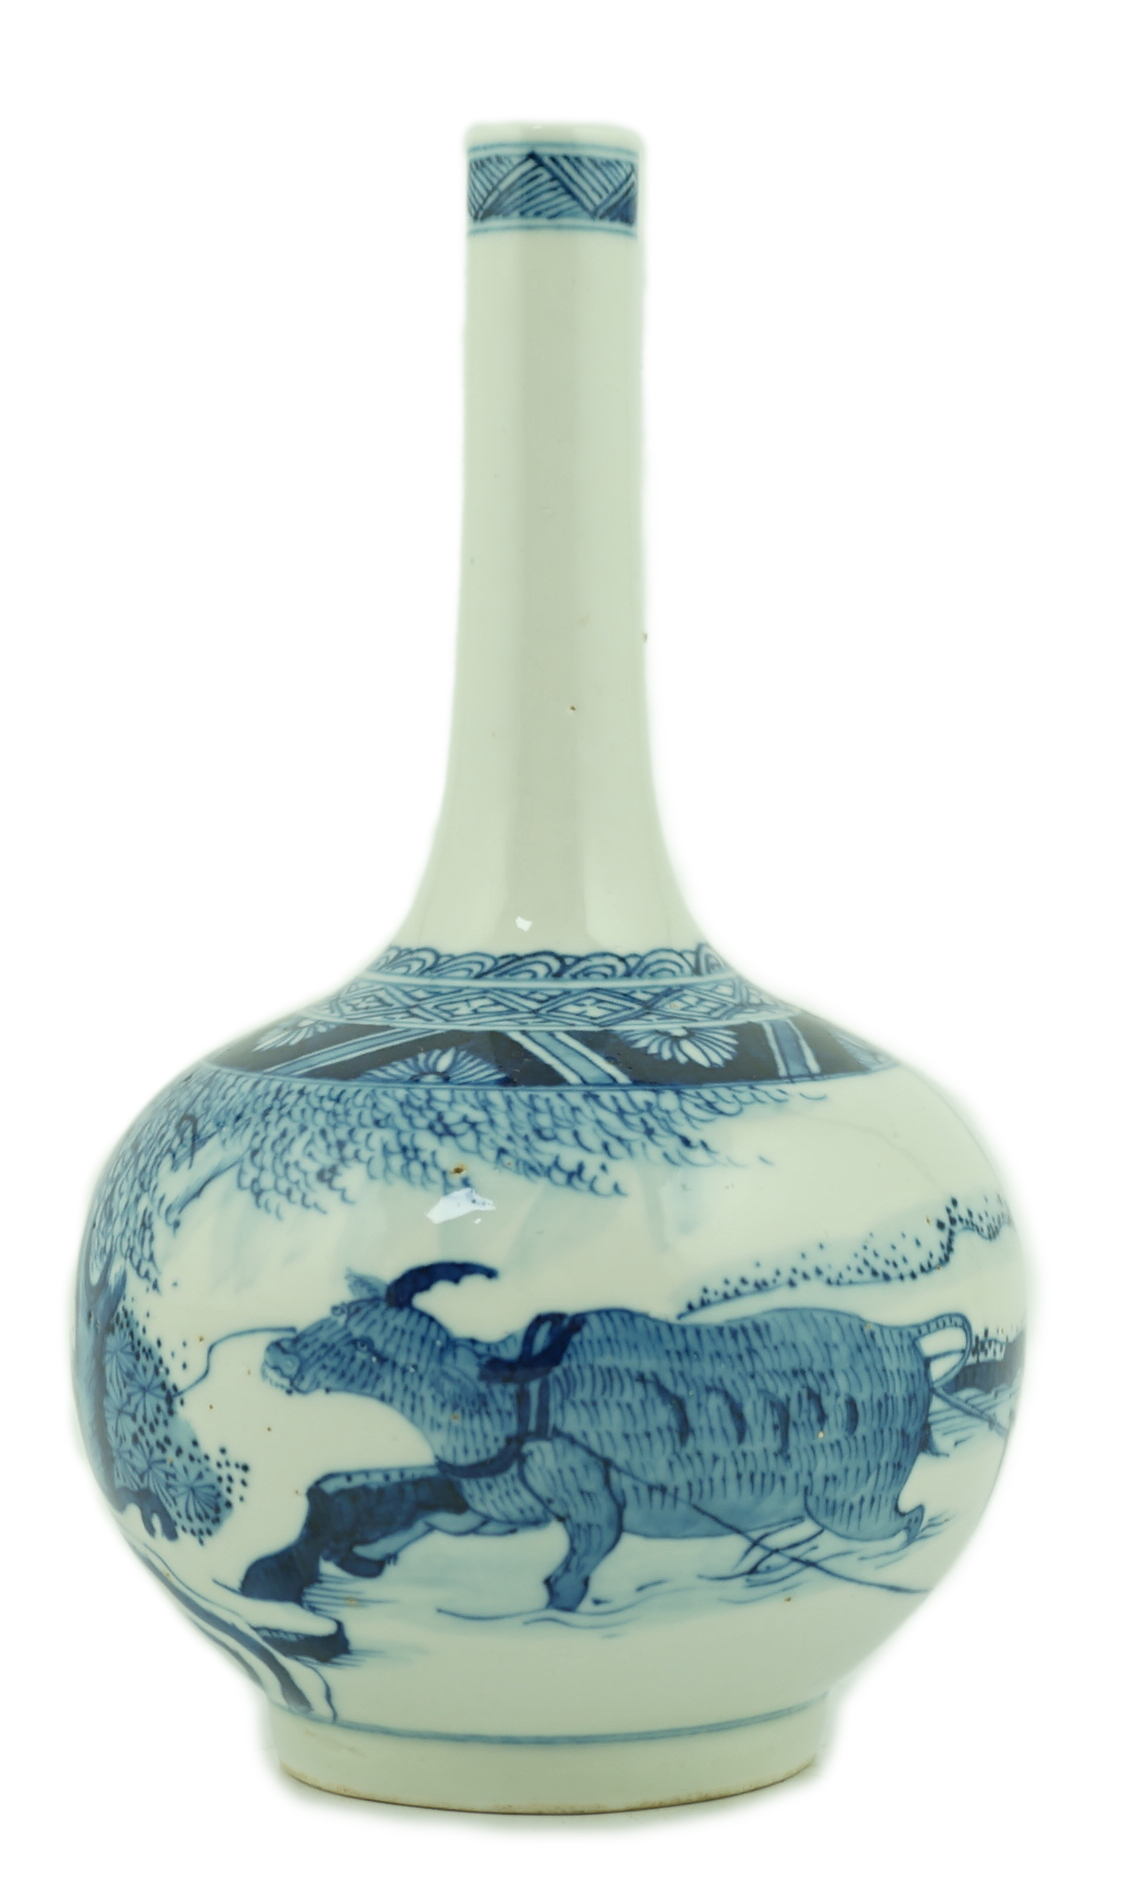 A Chinese blue and white 'ox and plough' bottle vase, late 19th century